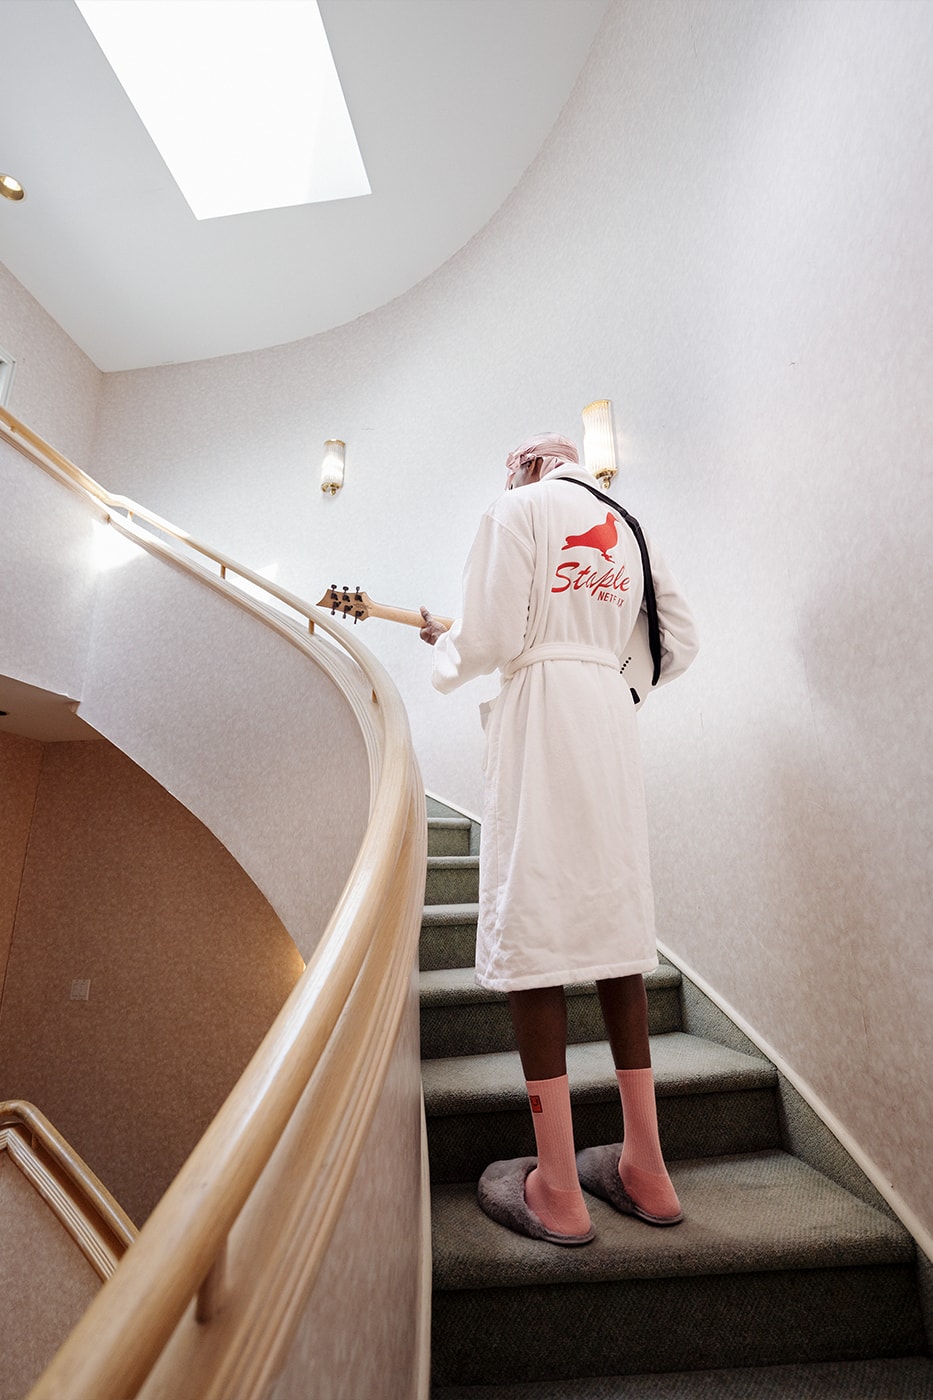 STAPLE Keeps It Cozy and Chill With Newest Netflix Collaboration jeffstaple jeff staple capsule robe clothes